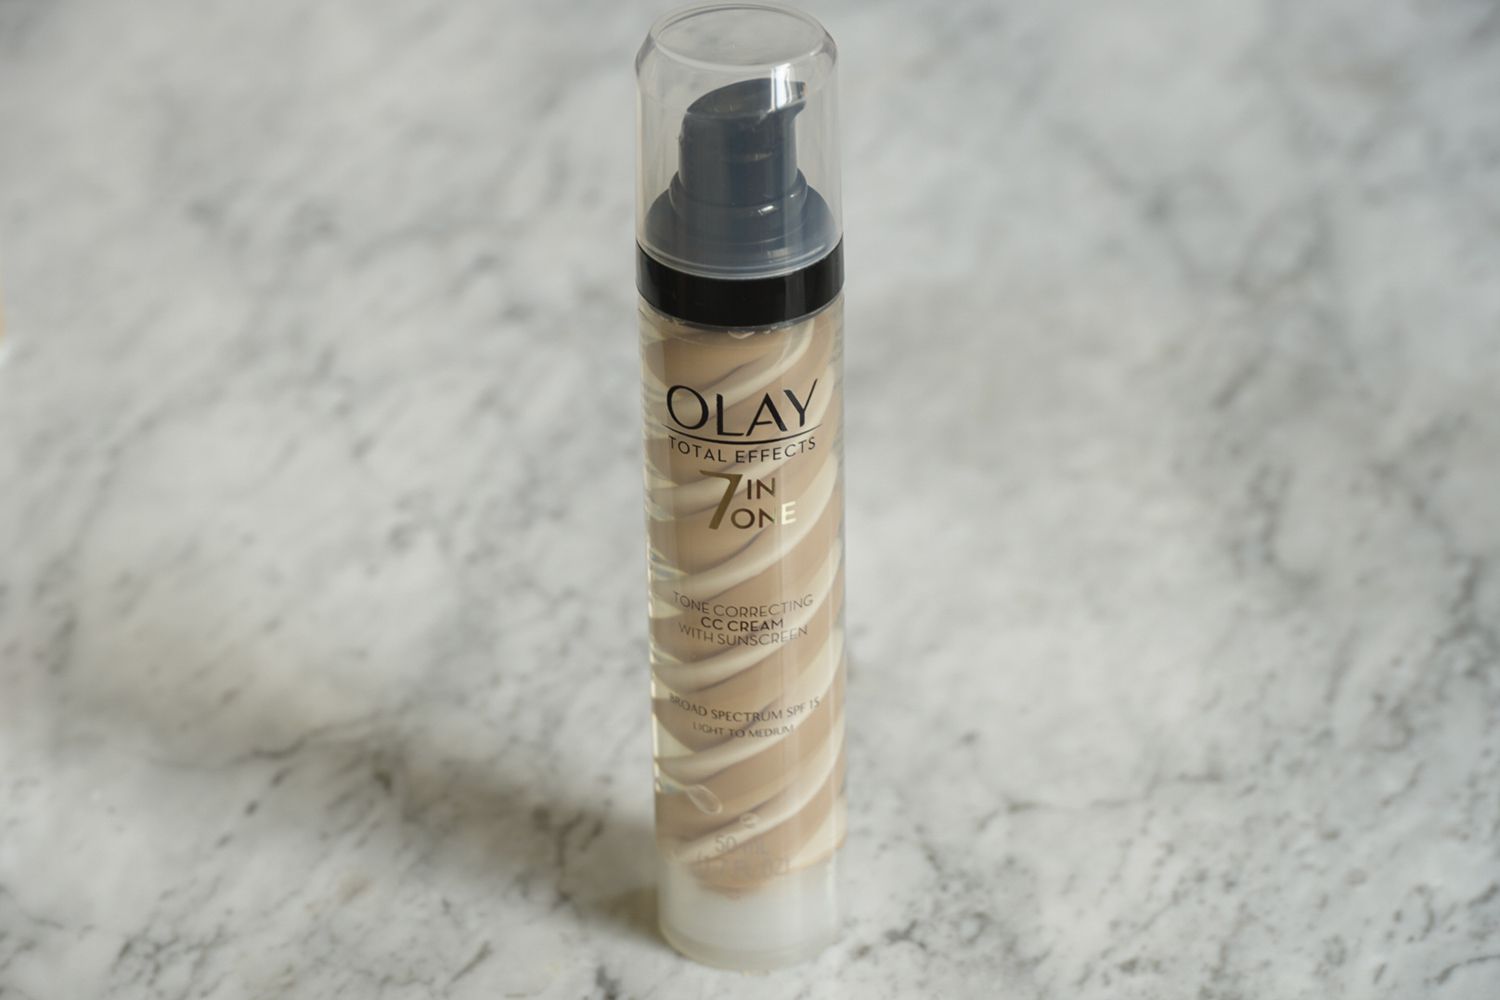 Olay Total Effects Tom CC Creme